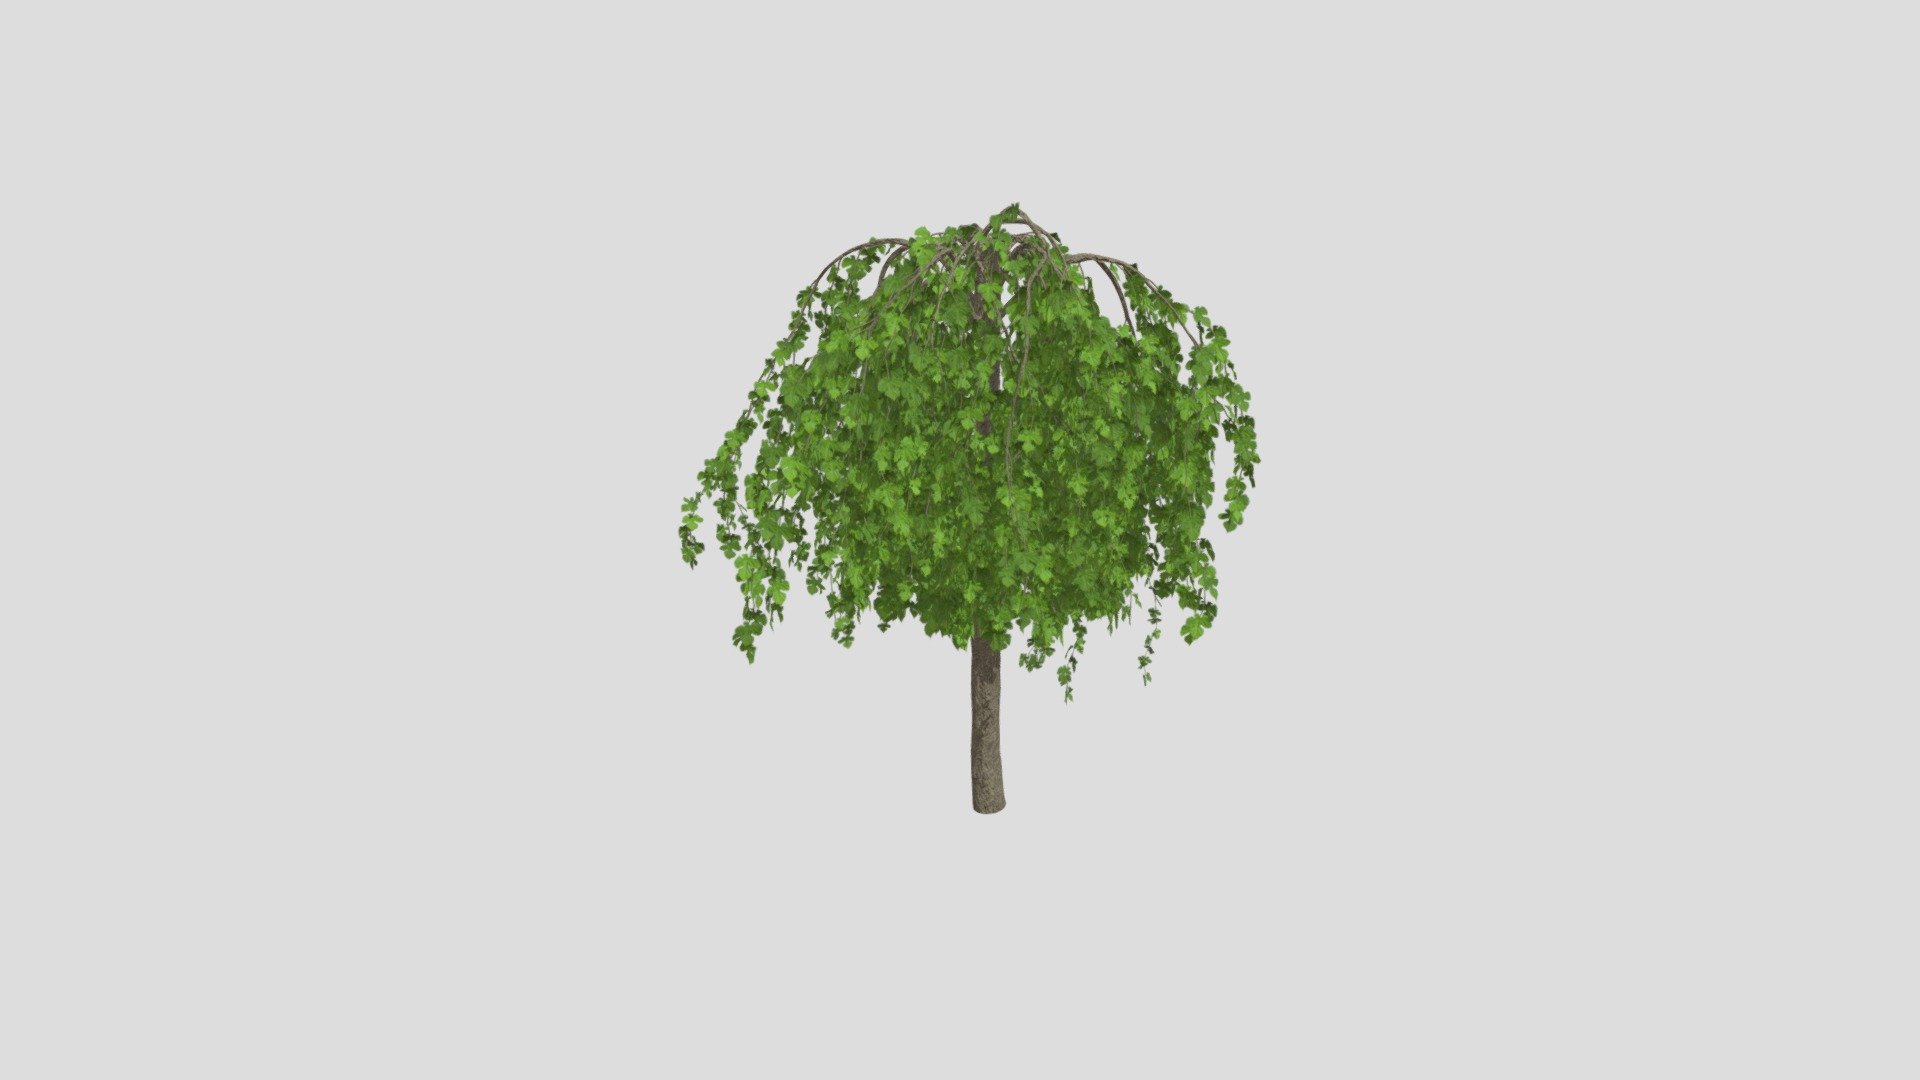 Highly detailed 3d model of tree with all textures, shaders and materials. This 3d model is ready to use, just put it into your scene 3d model